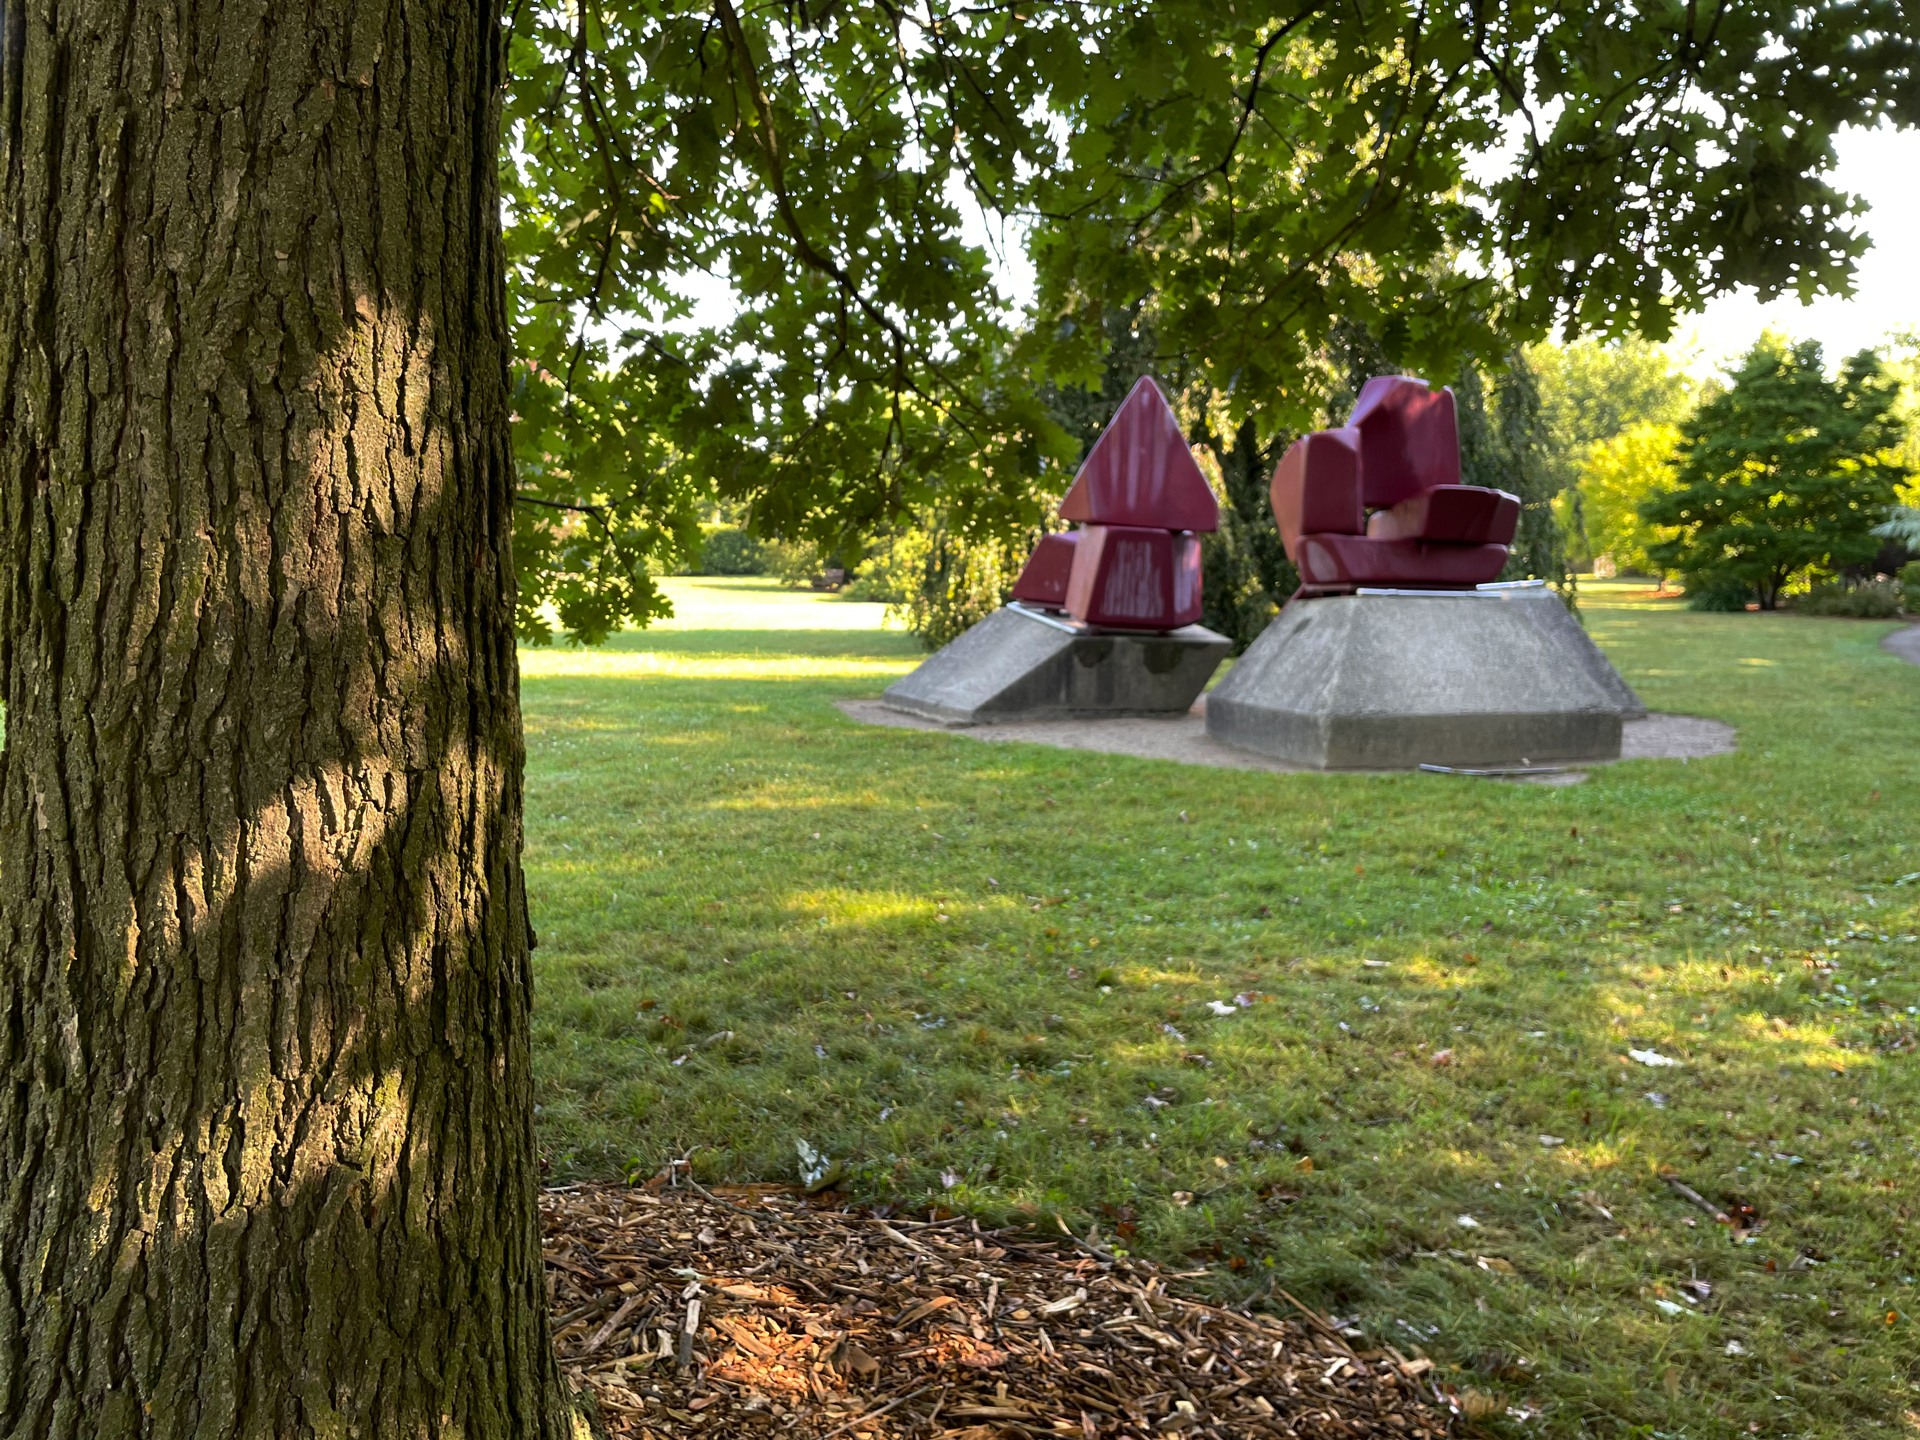 a colour photo of a sculpture in a park from under a tree on a rainy day